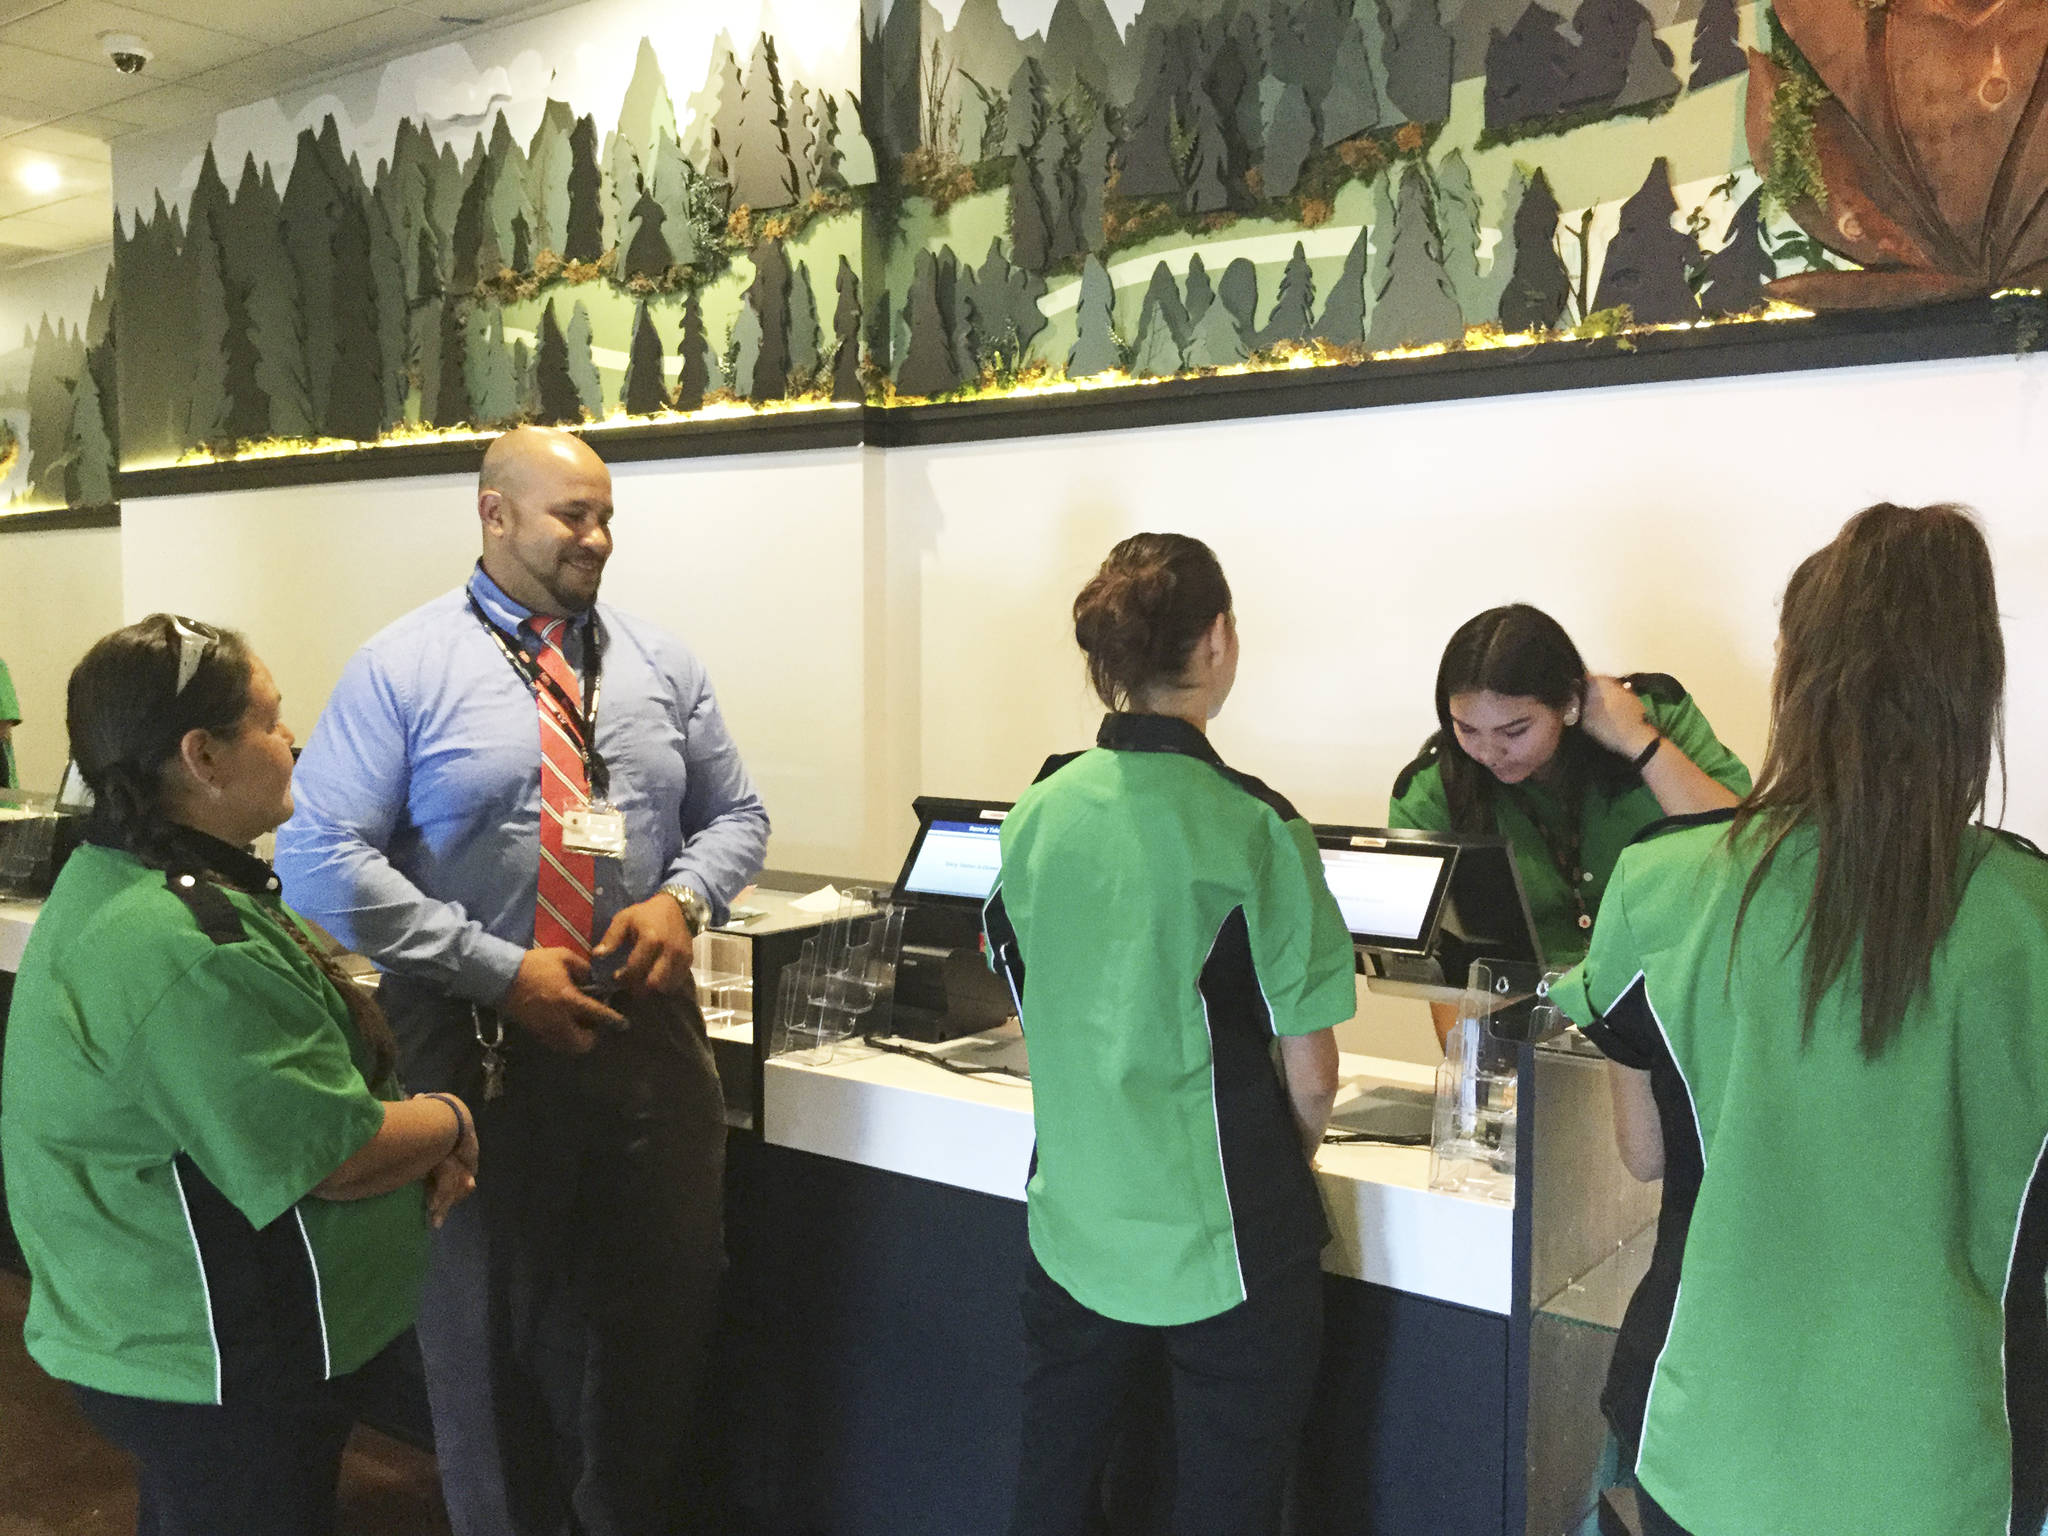 Jonathan Teeters, Asst. General Manager of Traditional Biologics Company (Remedy Tulalip) and concierges take trial runs preparing for the grand opening of Remedy Tulalip, a tribe-owned cannabis retail store that opened Friday.